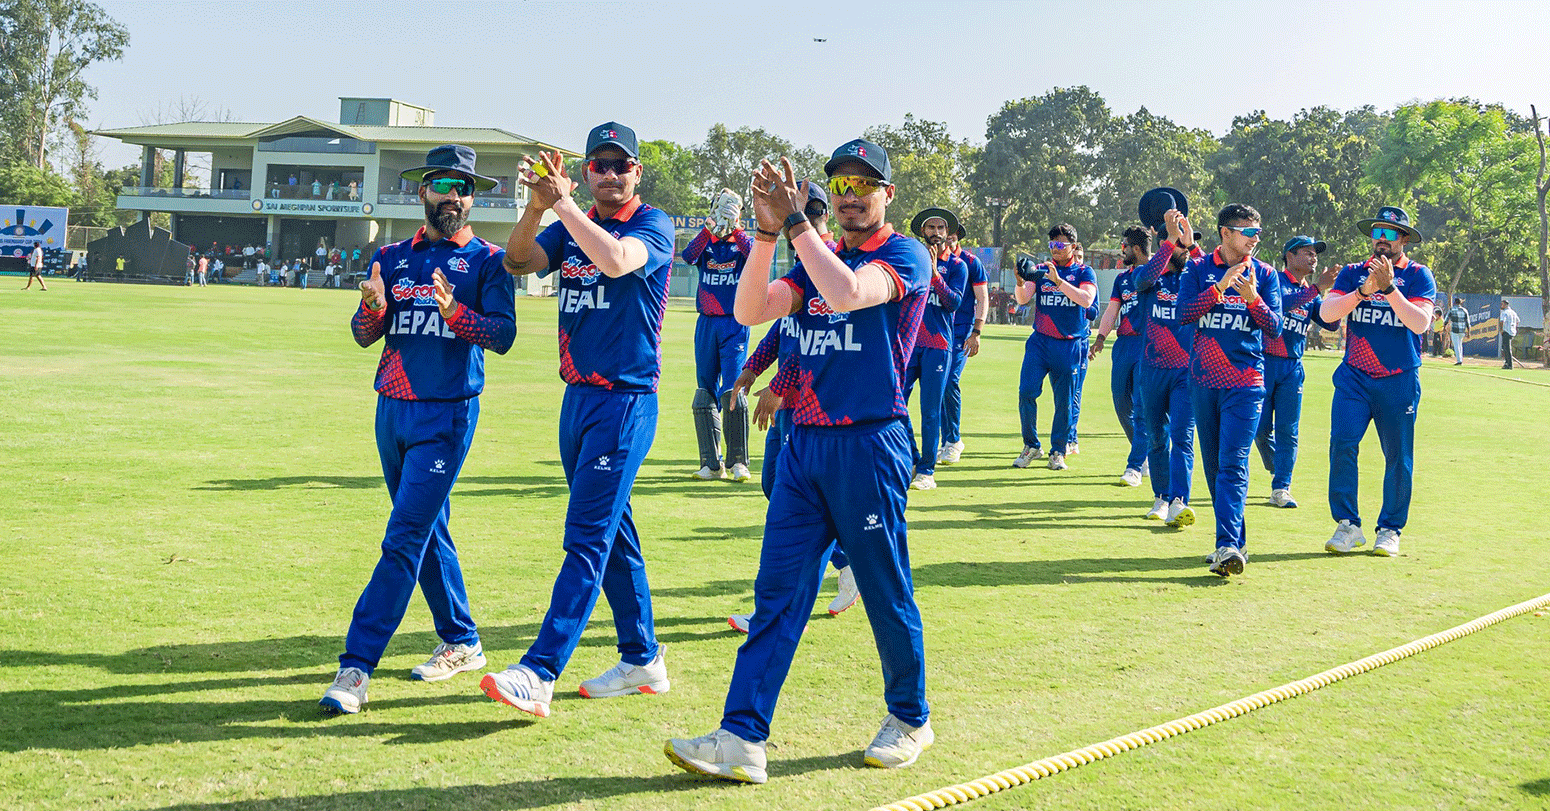 Nepal gears up for 2nd clash against West Indies ‘A’ following first match victory